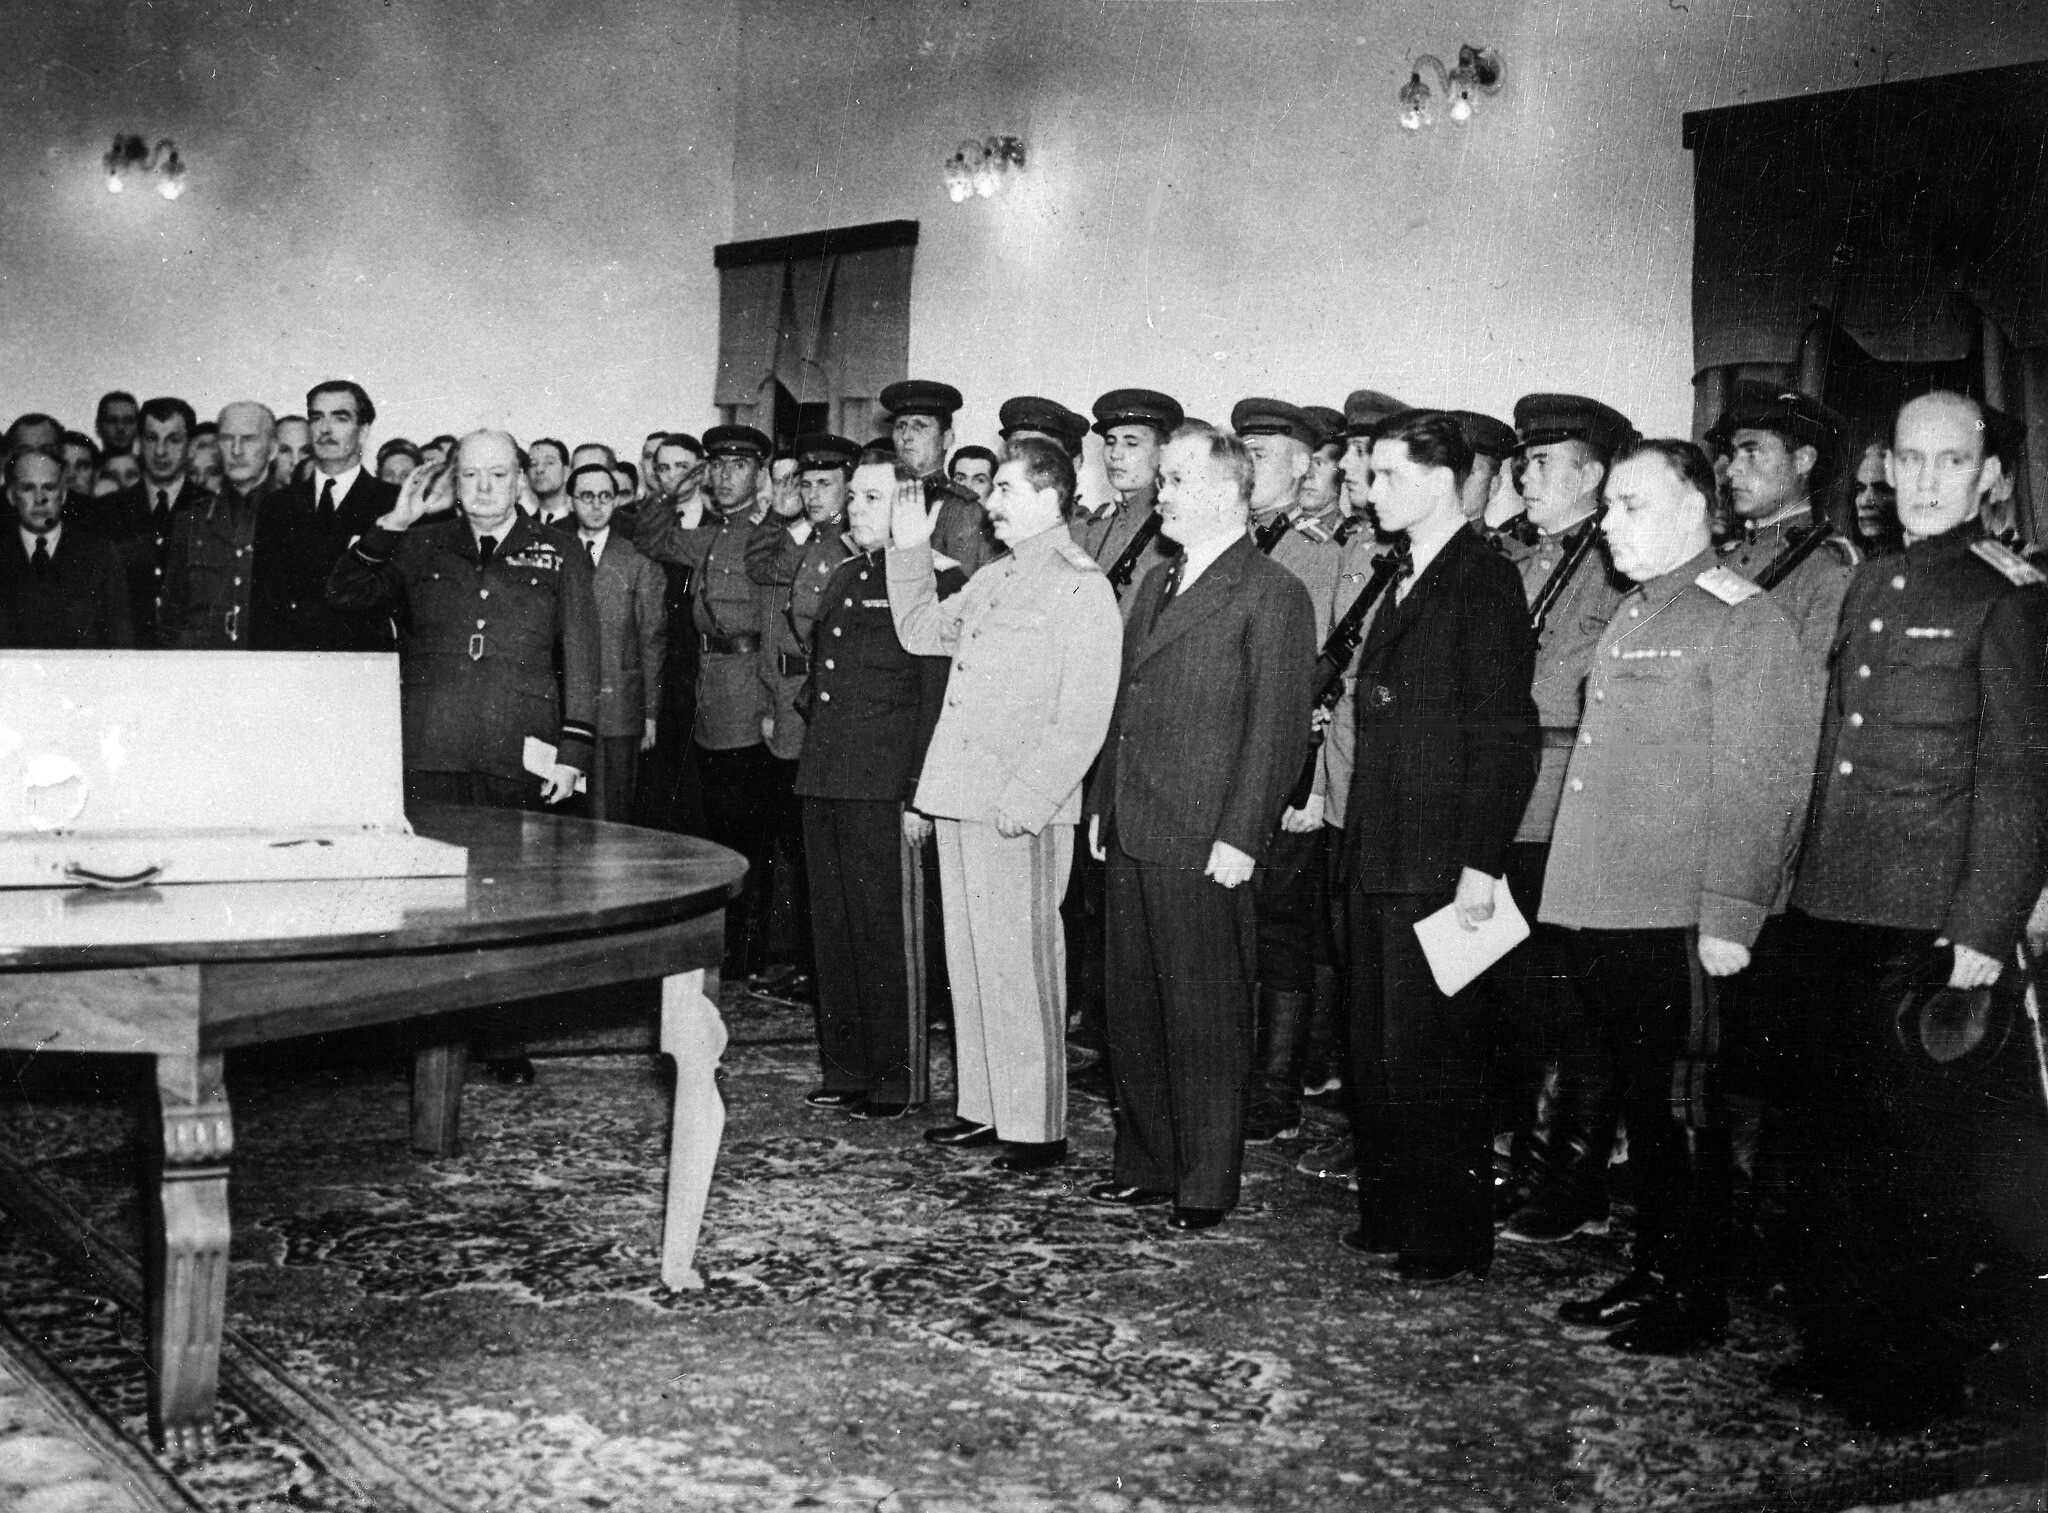 Josef Stalin and Winston Churchill salute their national anthems during the presentation of the Sword of Stalingrad, a gift from Britain's King George VI to the people of Stalingrad, on the table, at the Soviet legation in Tehran, Iran, in November 1943. (AP Photo/British Official Photo)